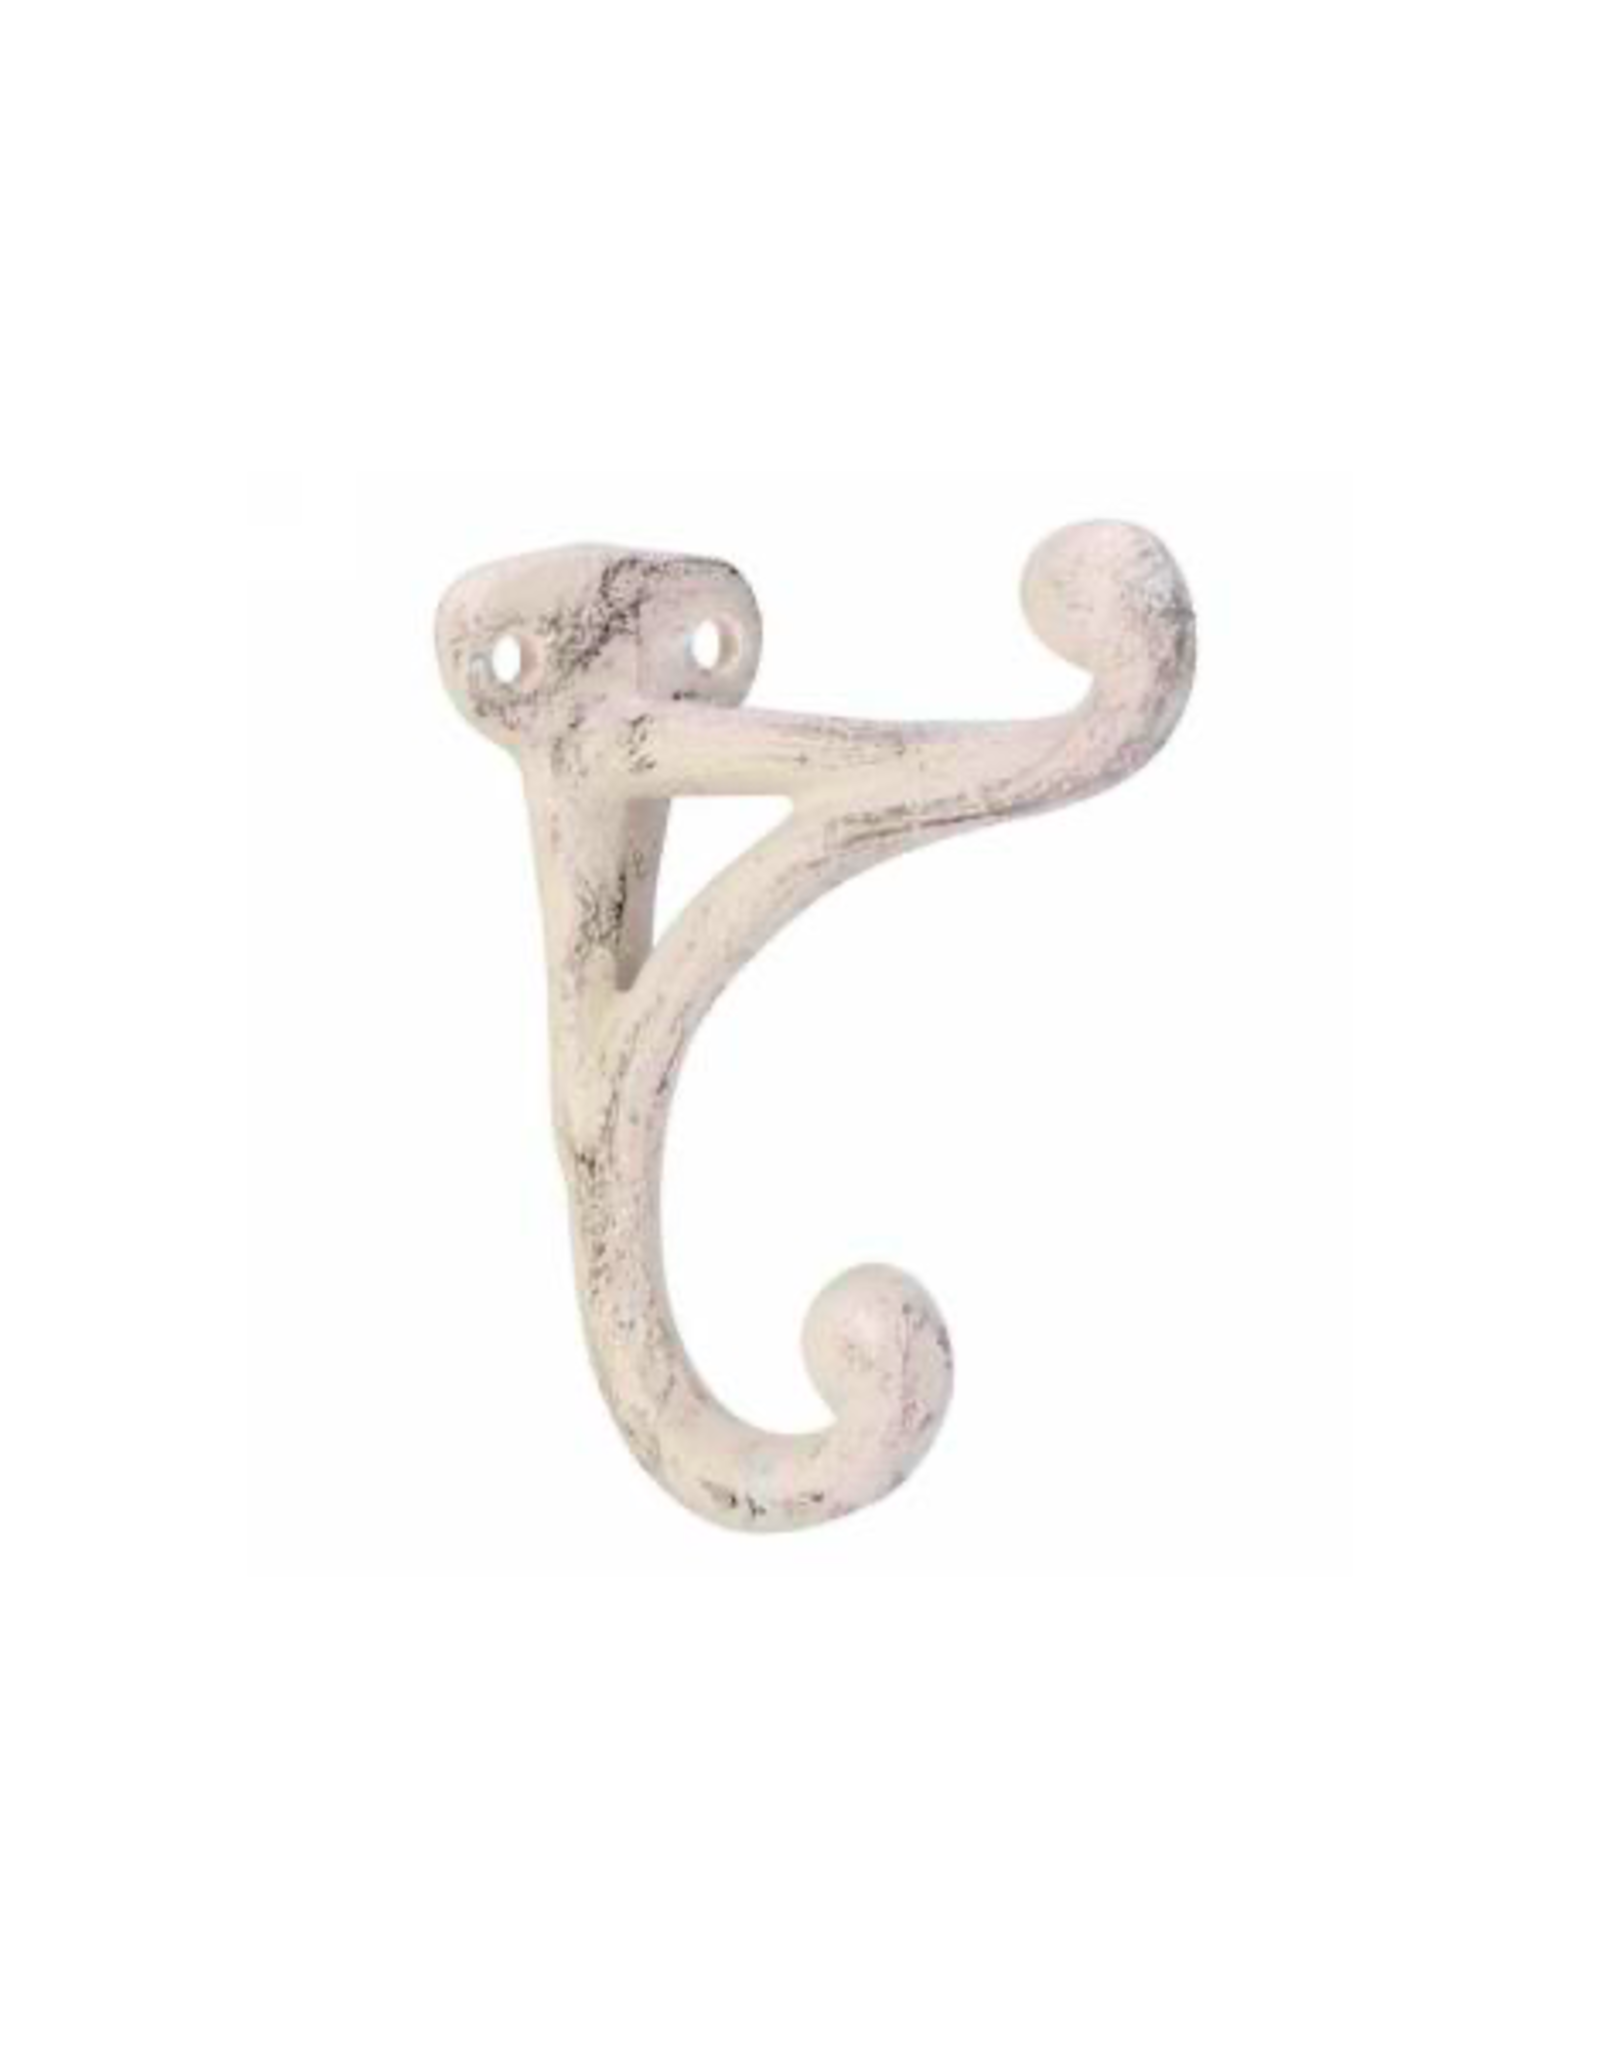 AES - Double Wall Hook / Antique White Metal, 1.75 x 4"